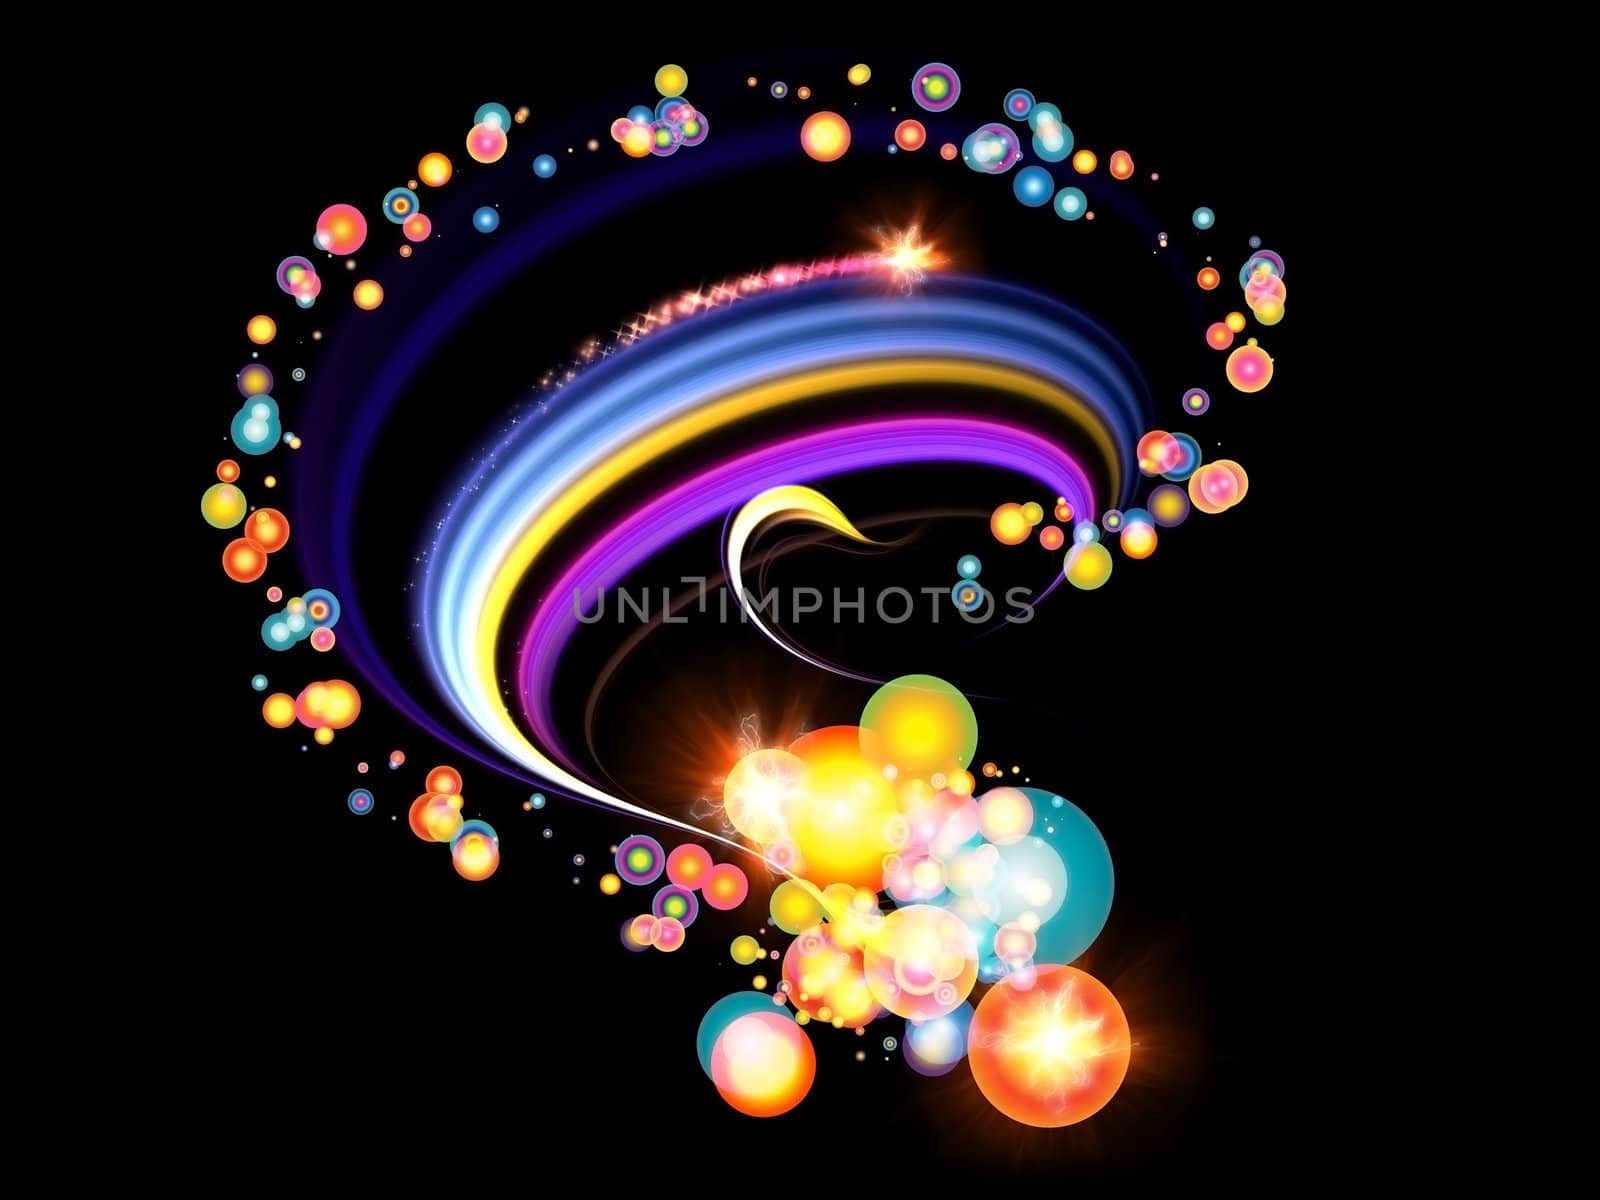 Dynamic burst of abstract color forms and lights against dark background on the subject of positive energy, action and joy